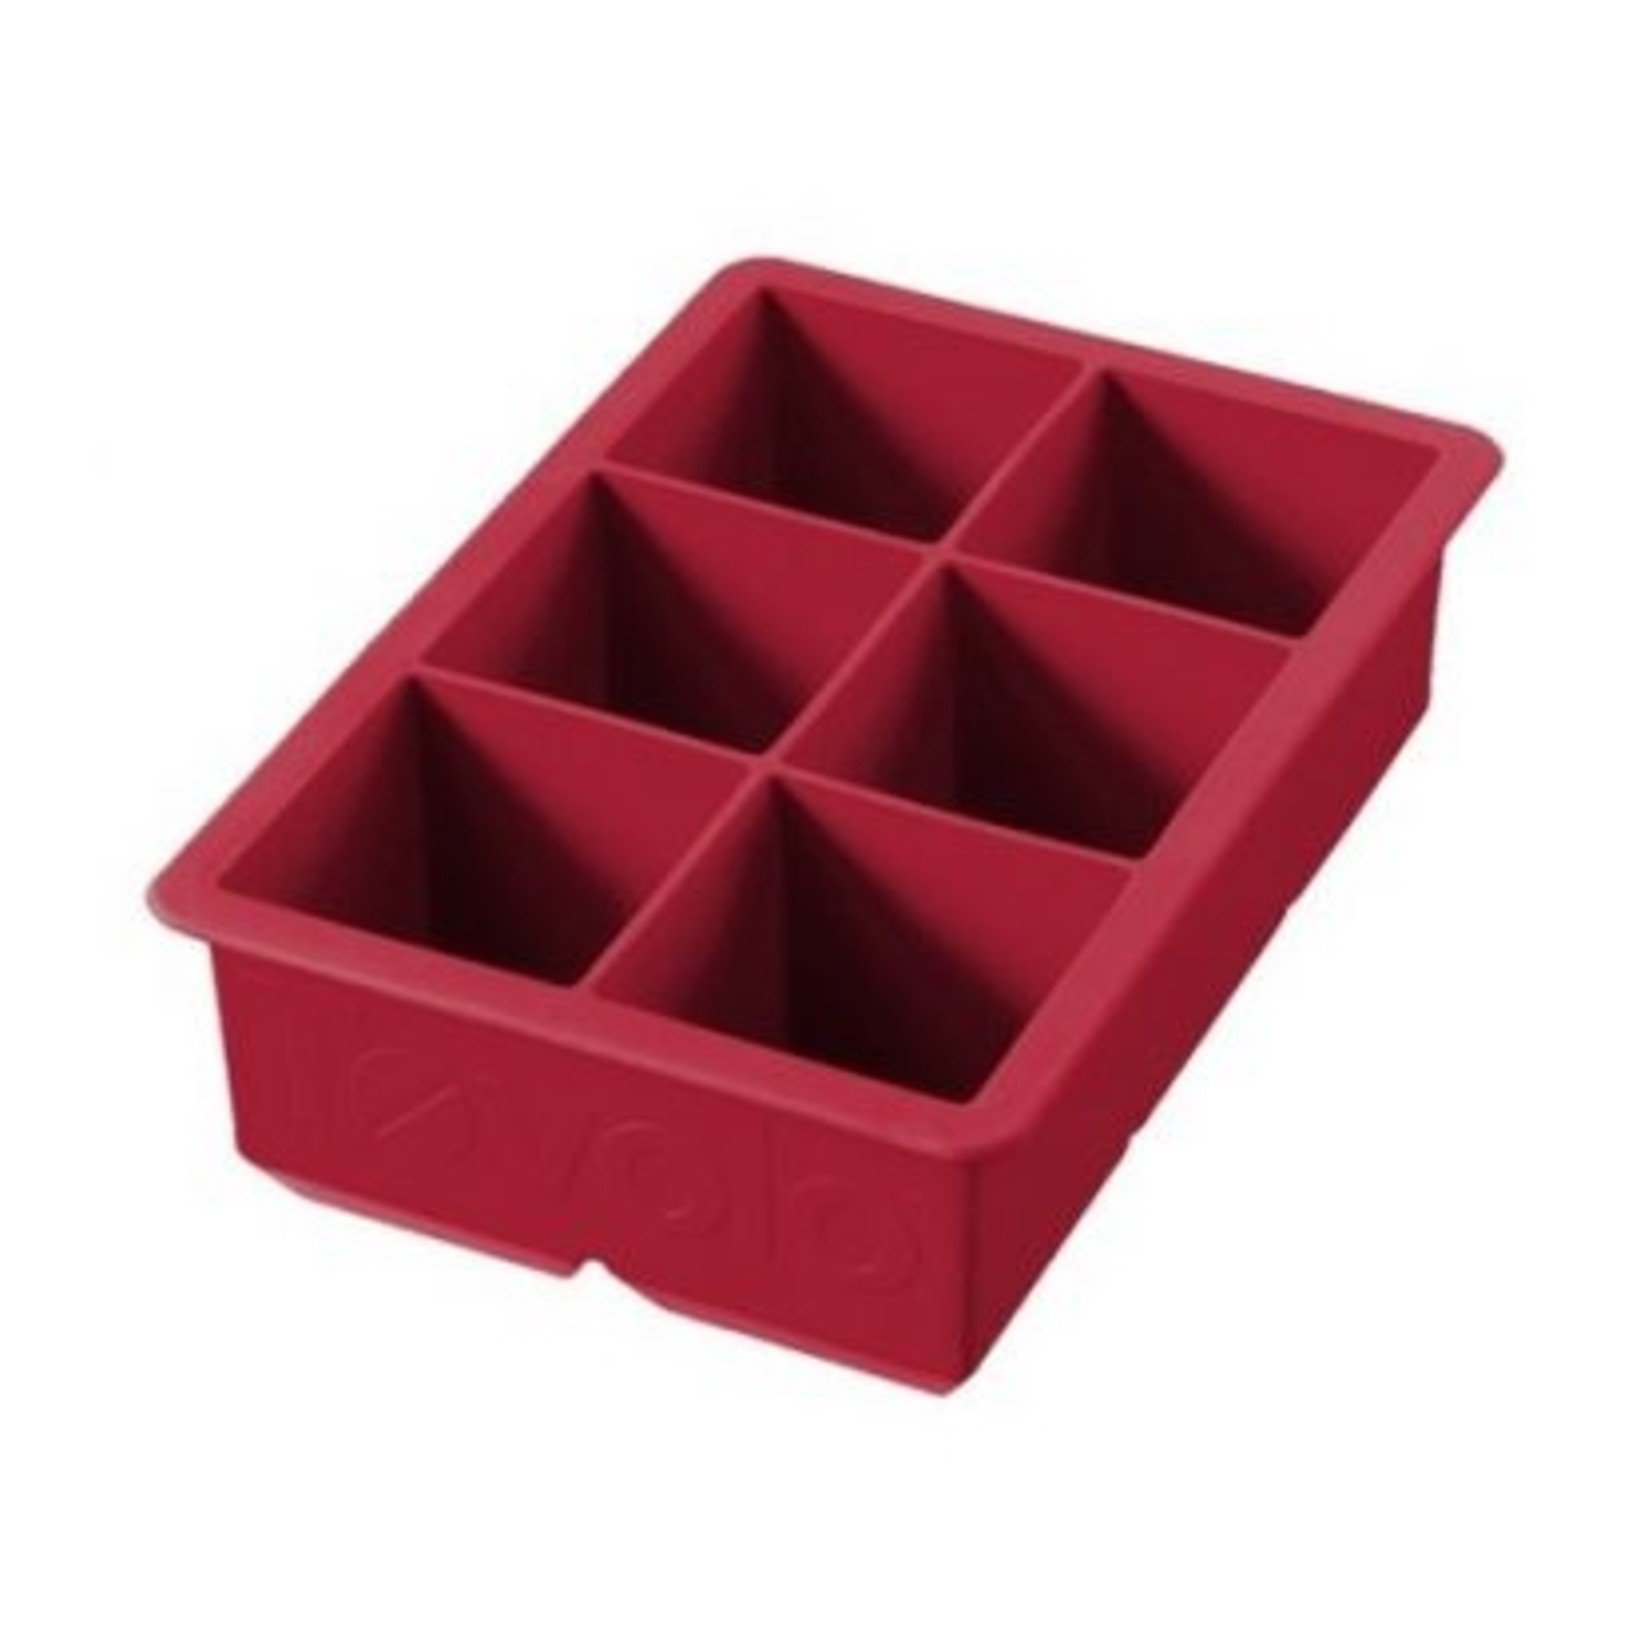 Tovolo King Cube Ice Tray Cayenne